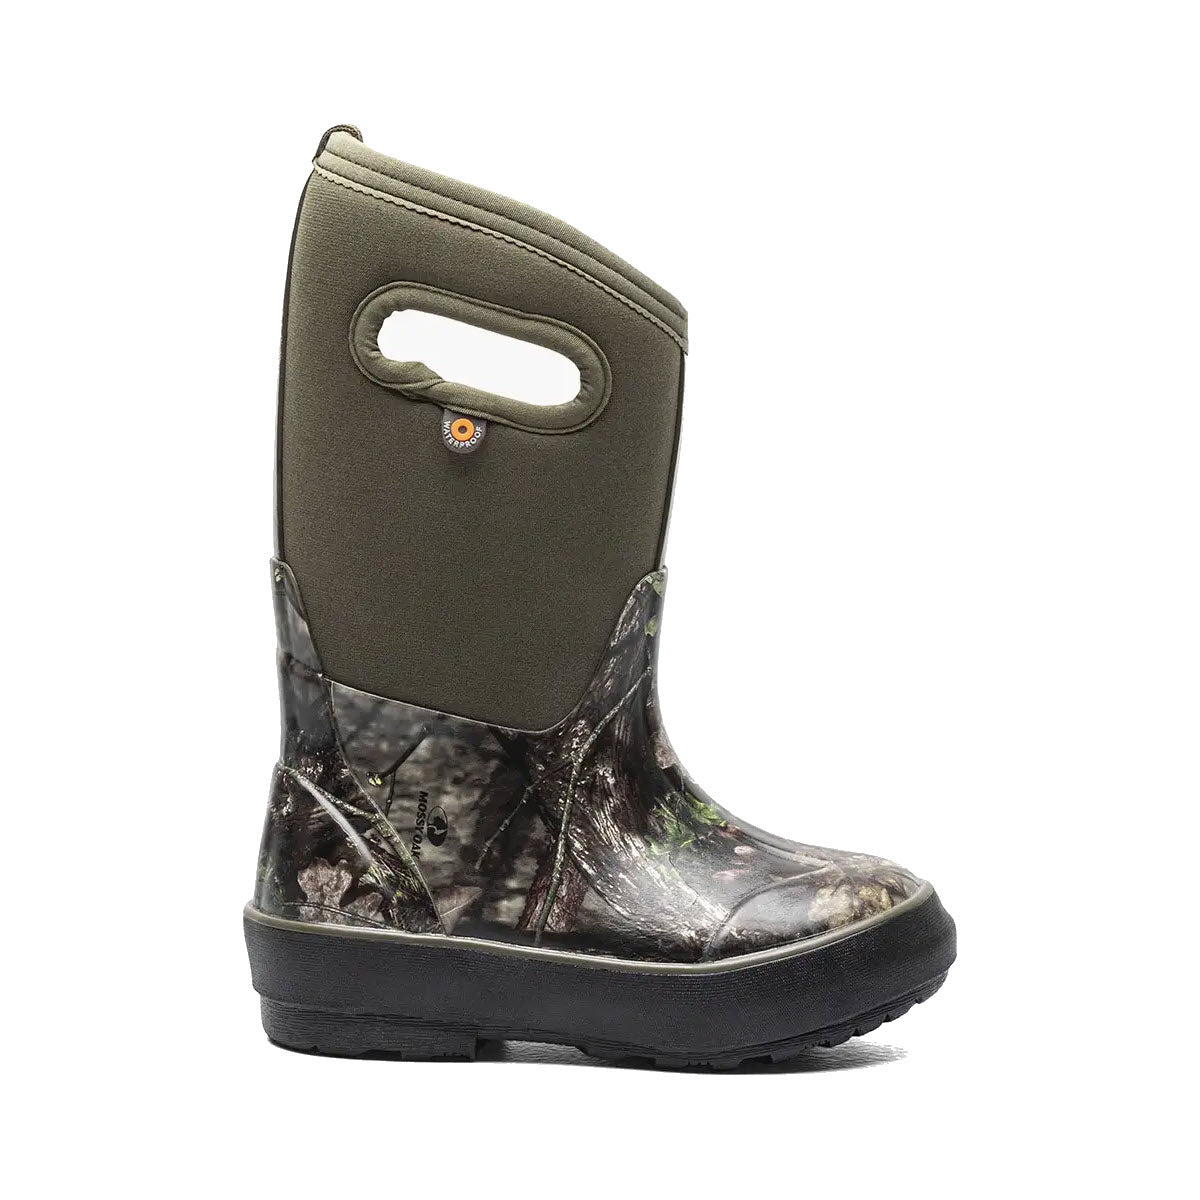 Bogs Classic II Mossy Oak - Kids rubber boot with green neoprene shaft and built-in handle, designed for better traction, isolated on white background.